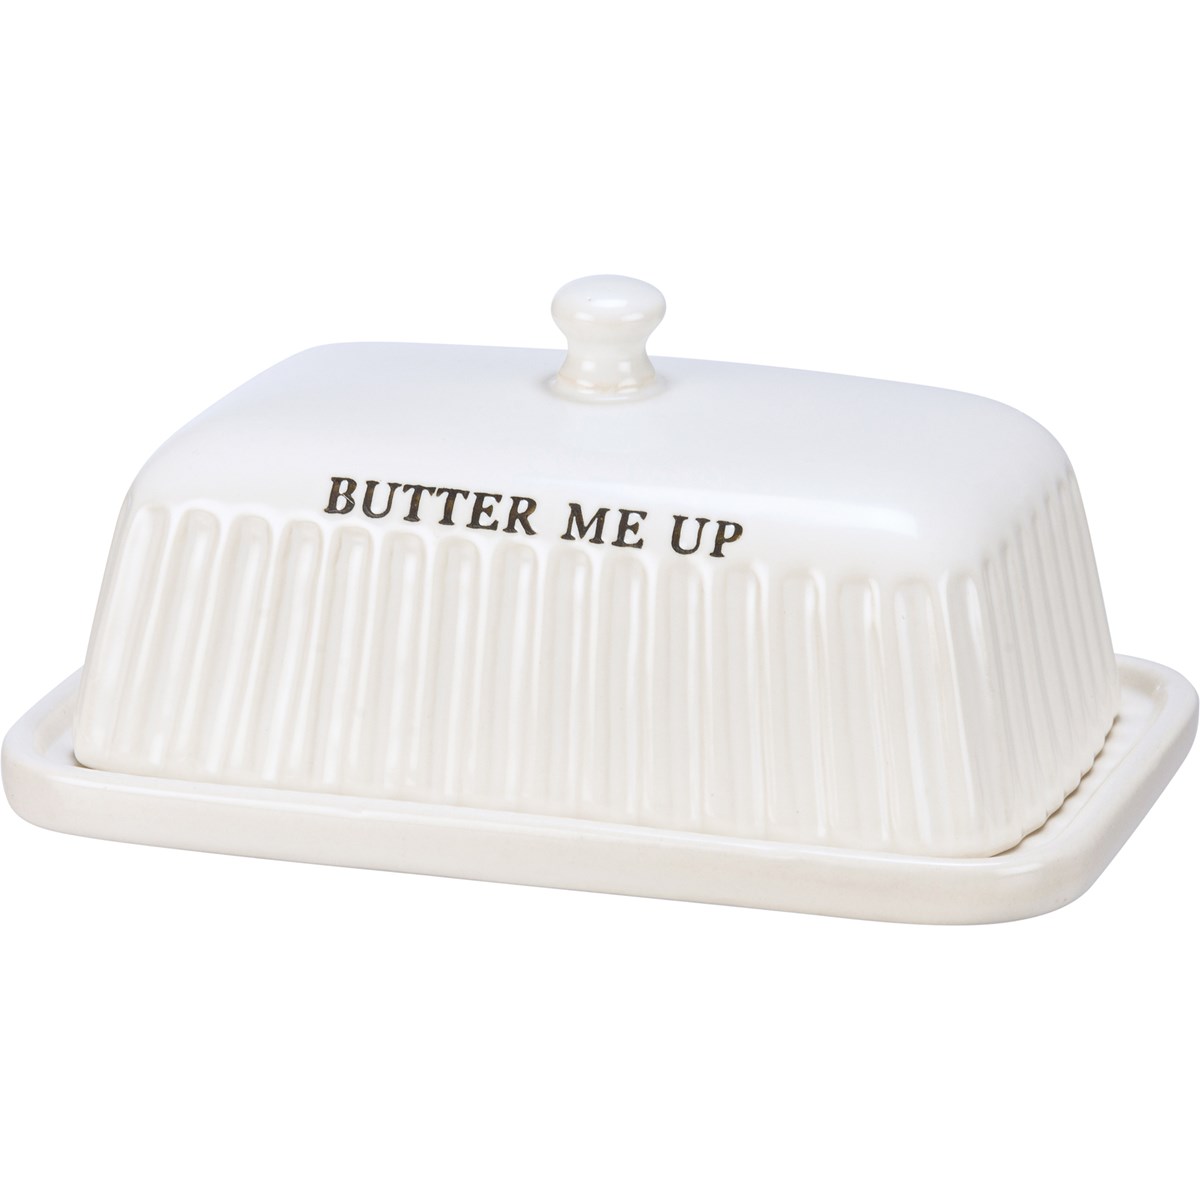 Butter Dish - Butter Me Up - 7" x 3" x 5" - Stoneware